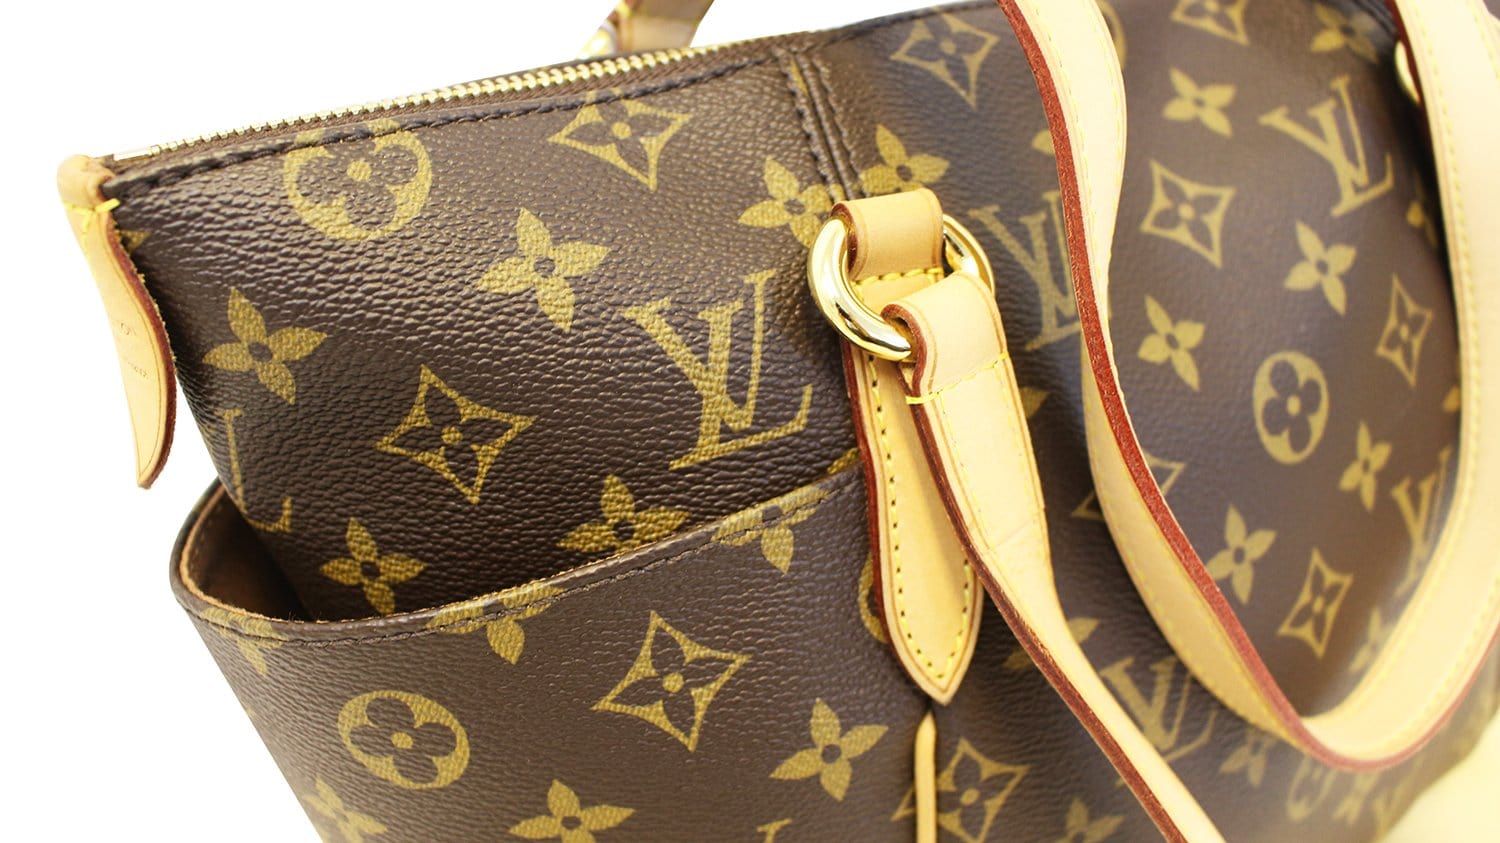 Sold at Auction: Louis Vuitton, LOUIS VUITTON TOTALLY PM TOTE